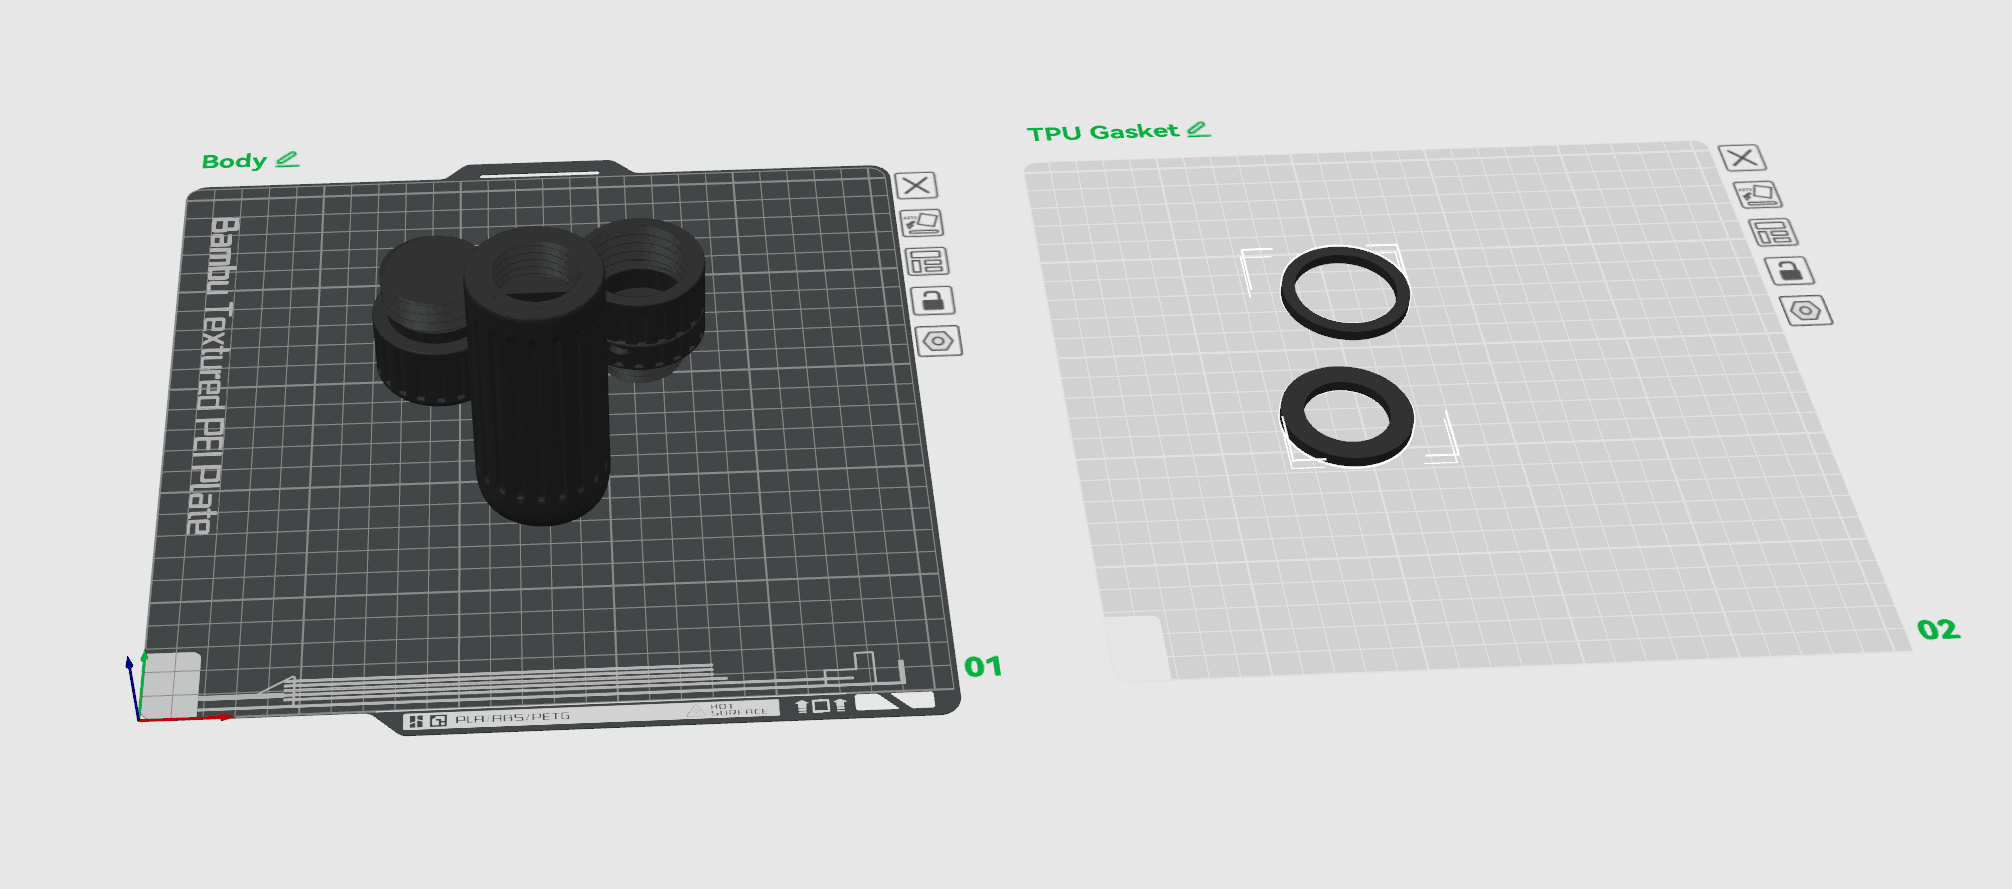 Ledger X Case with Air Tag- BambuLab project.3mf 3d model